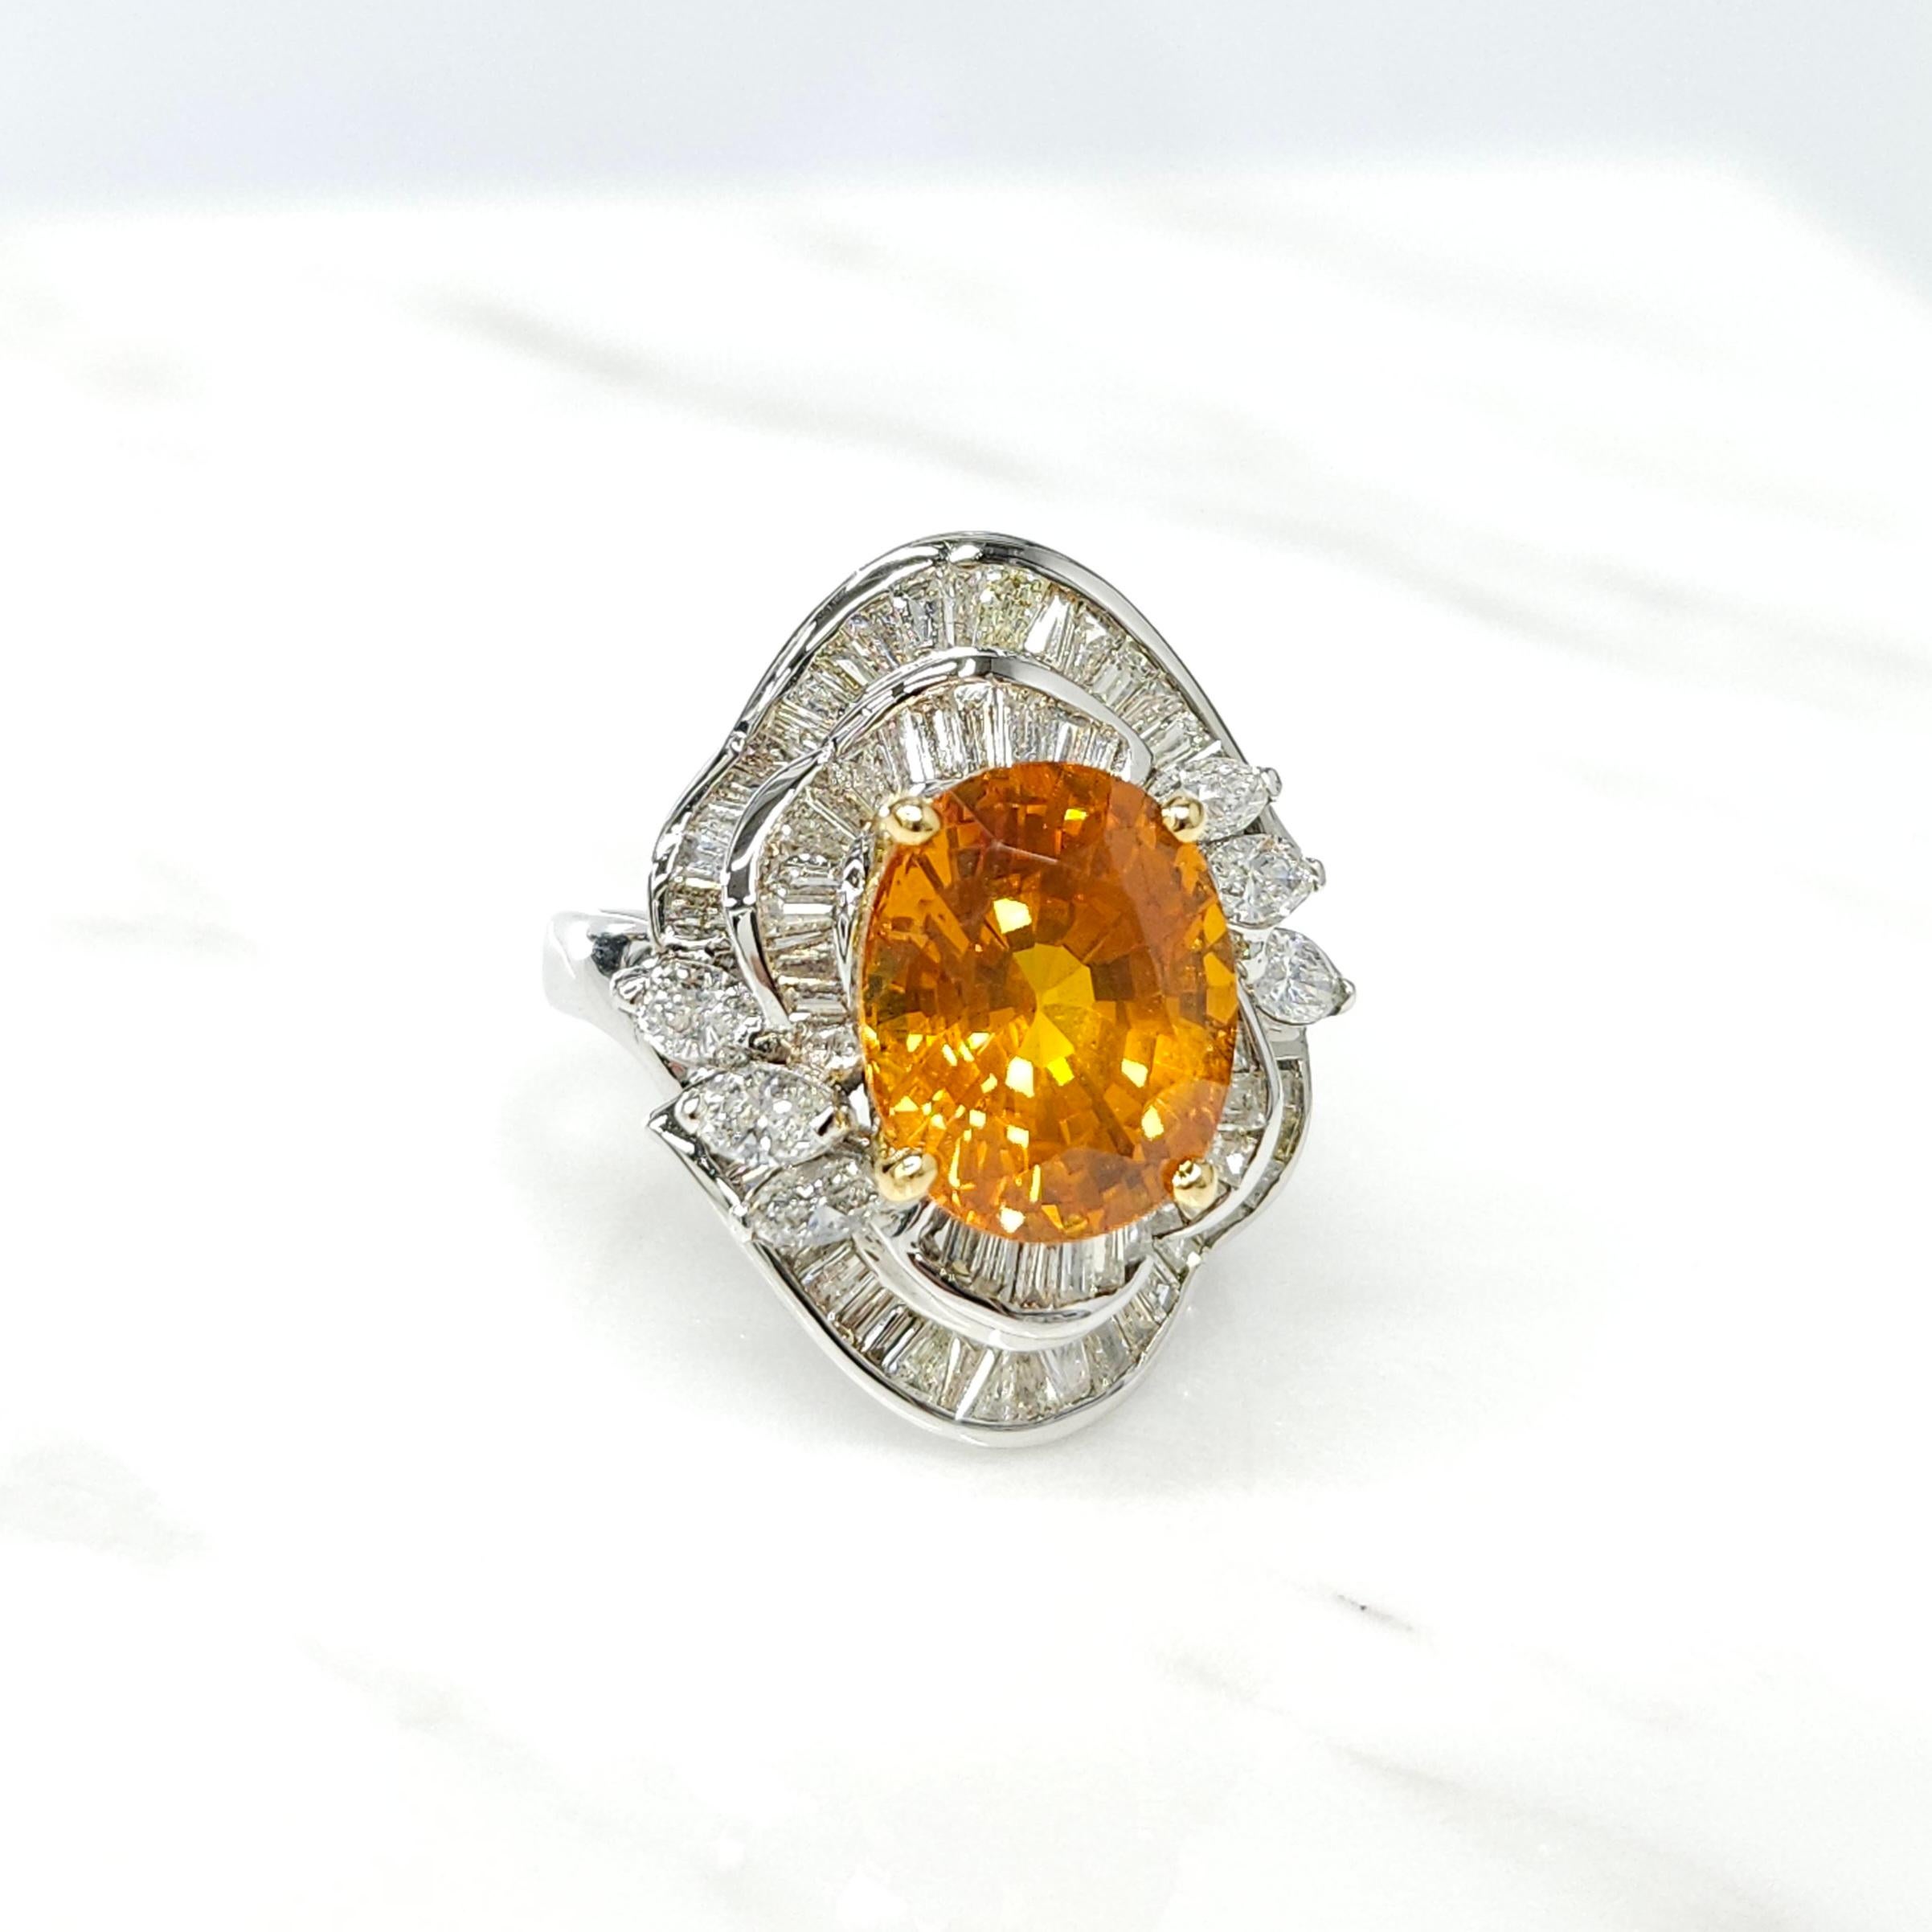 e IGI certified 18K white gold rare 6.08 Carat orange sapphire diamond ring is a truly remarkable piece of jewelry. The oval-shaped orange sapphire,originated from Sri Lanka, boasts a vivid yellowish orange color that is both captivating and unique.